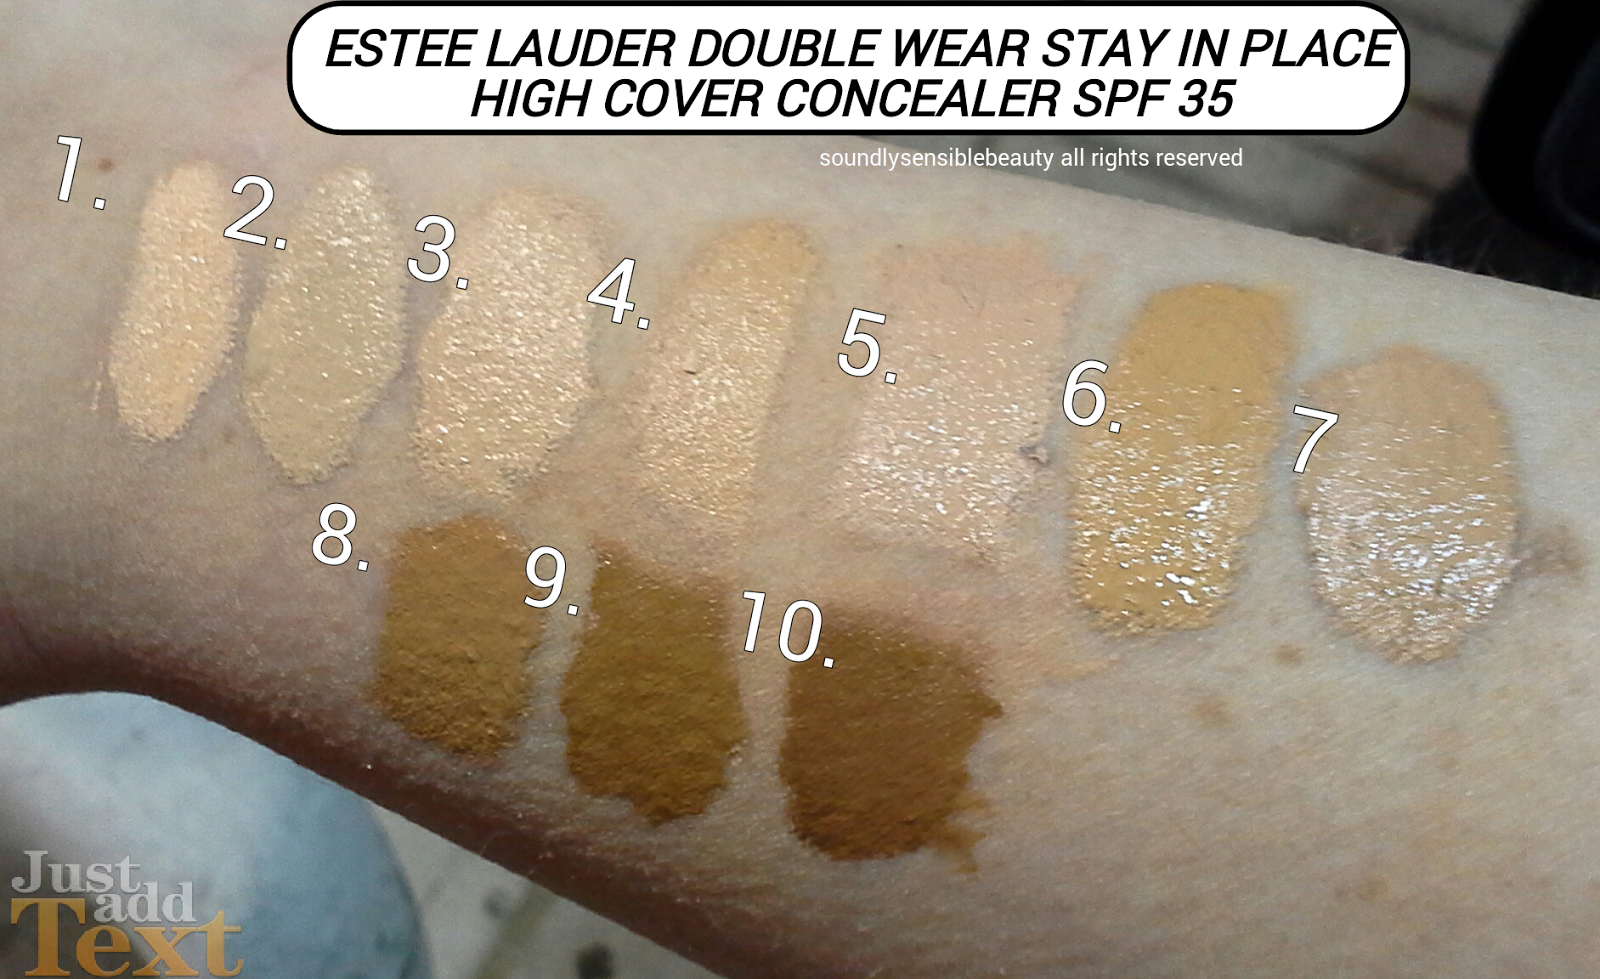 Vedholdende tempo Lodge Estee Lauder Double Wear High Cover Concealer Review & Swatches of Shades